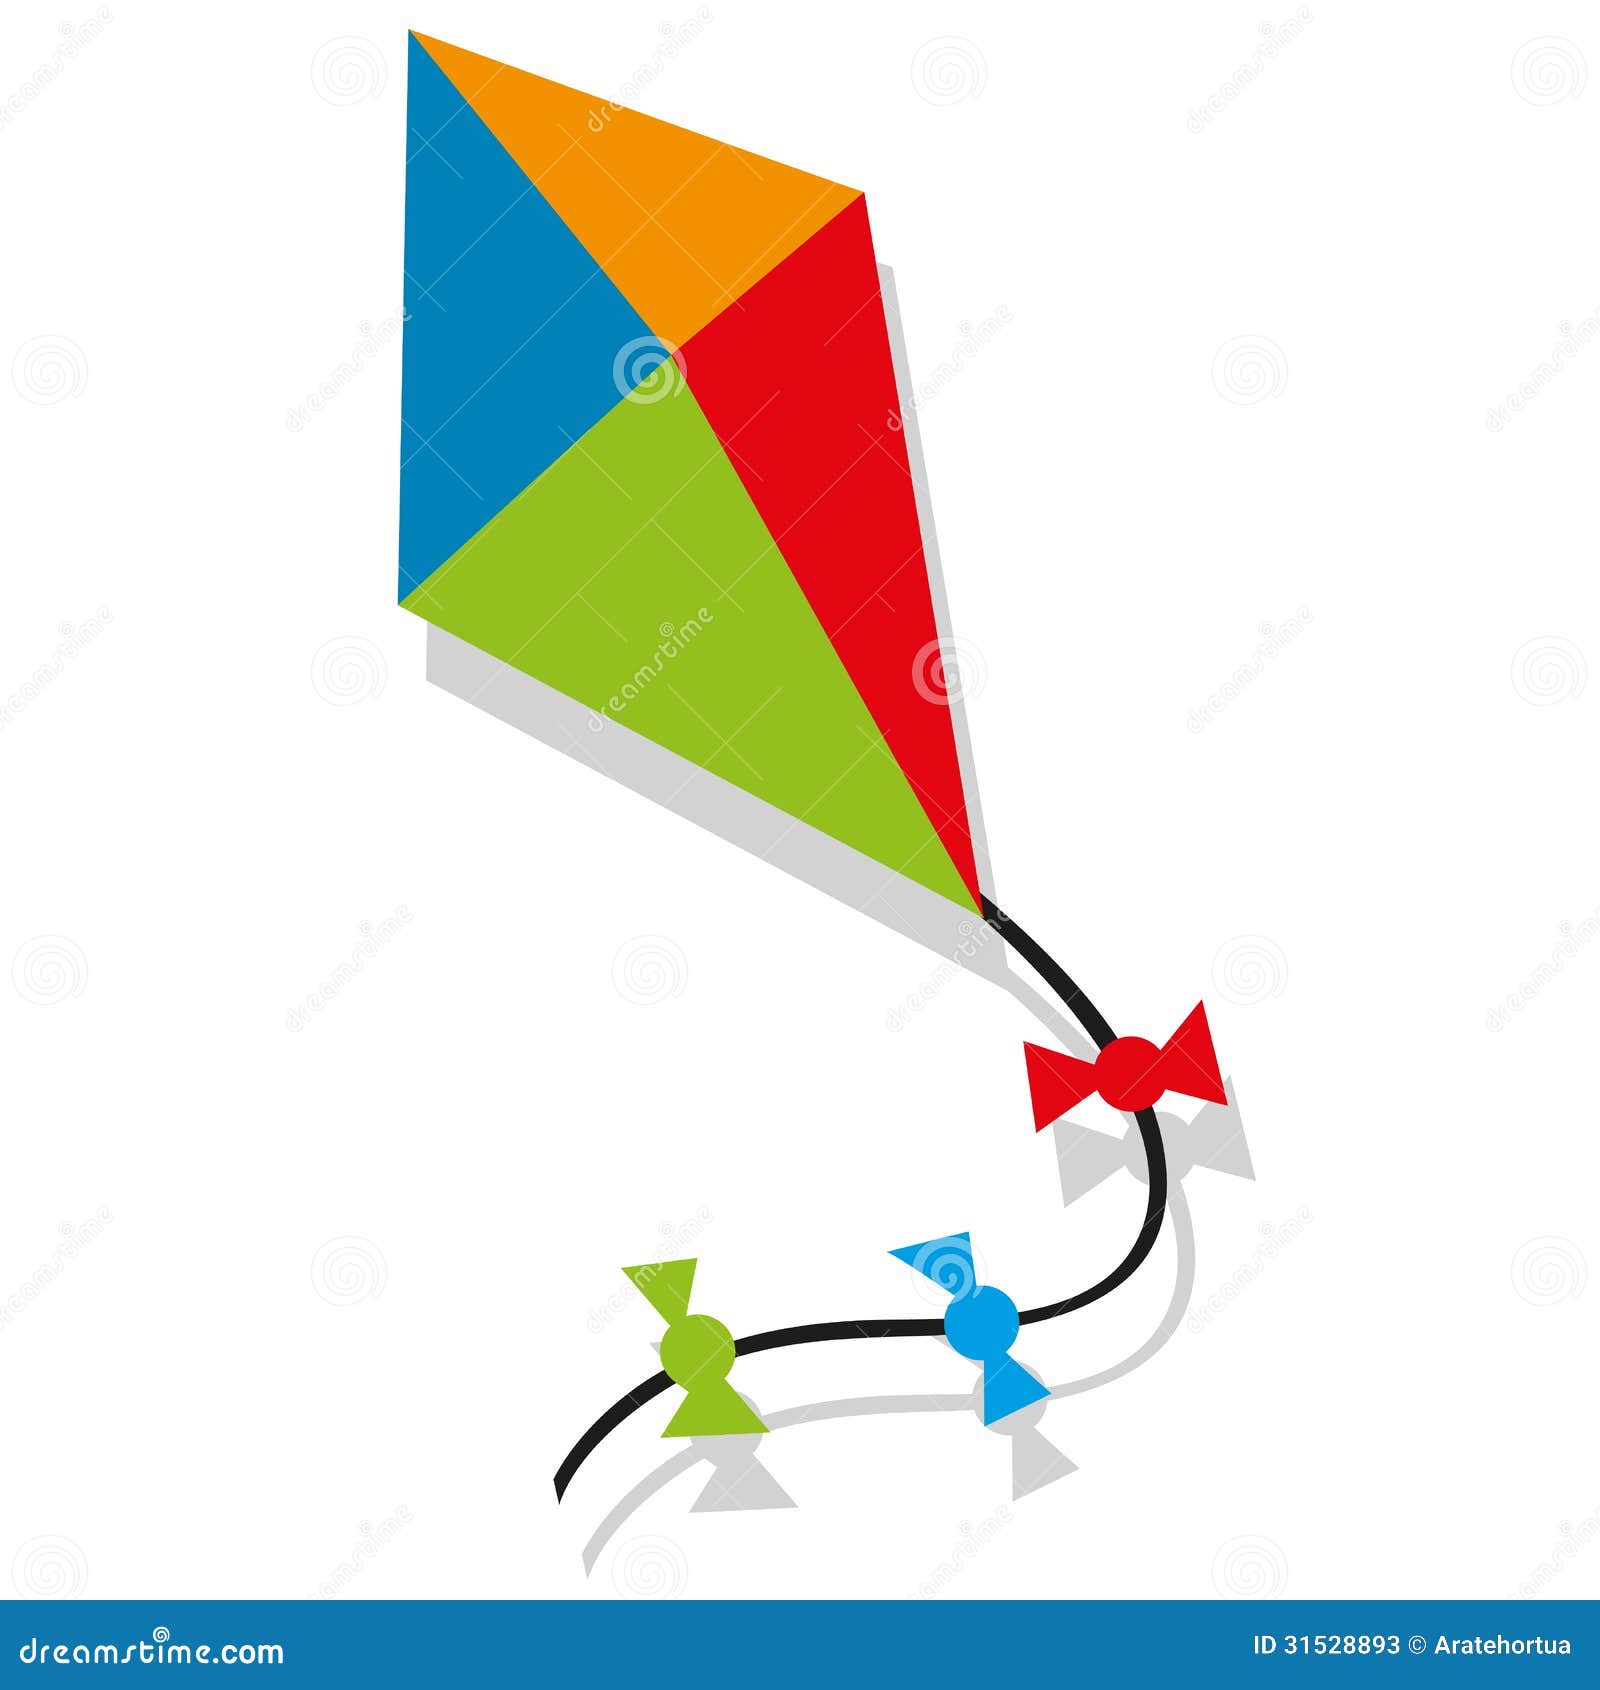 colorfull cartoon vector kite blue, orange, green and red.